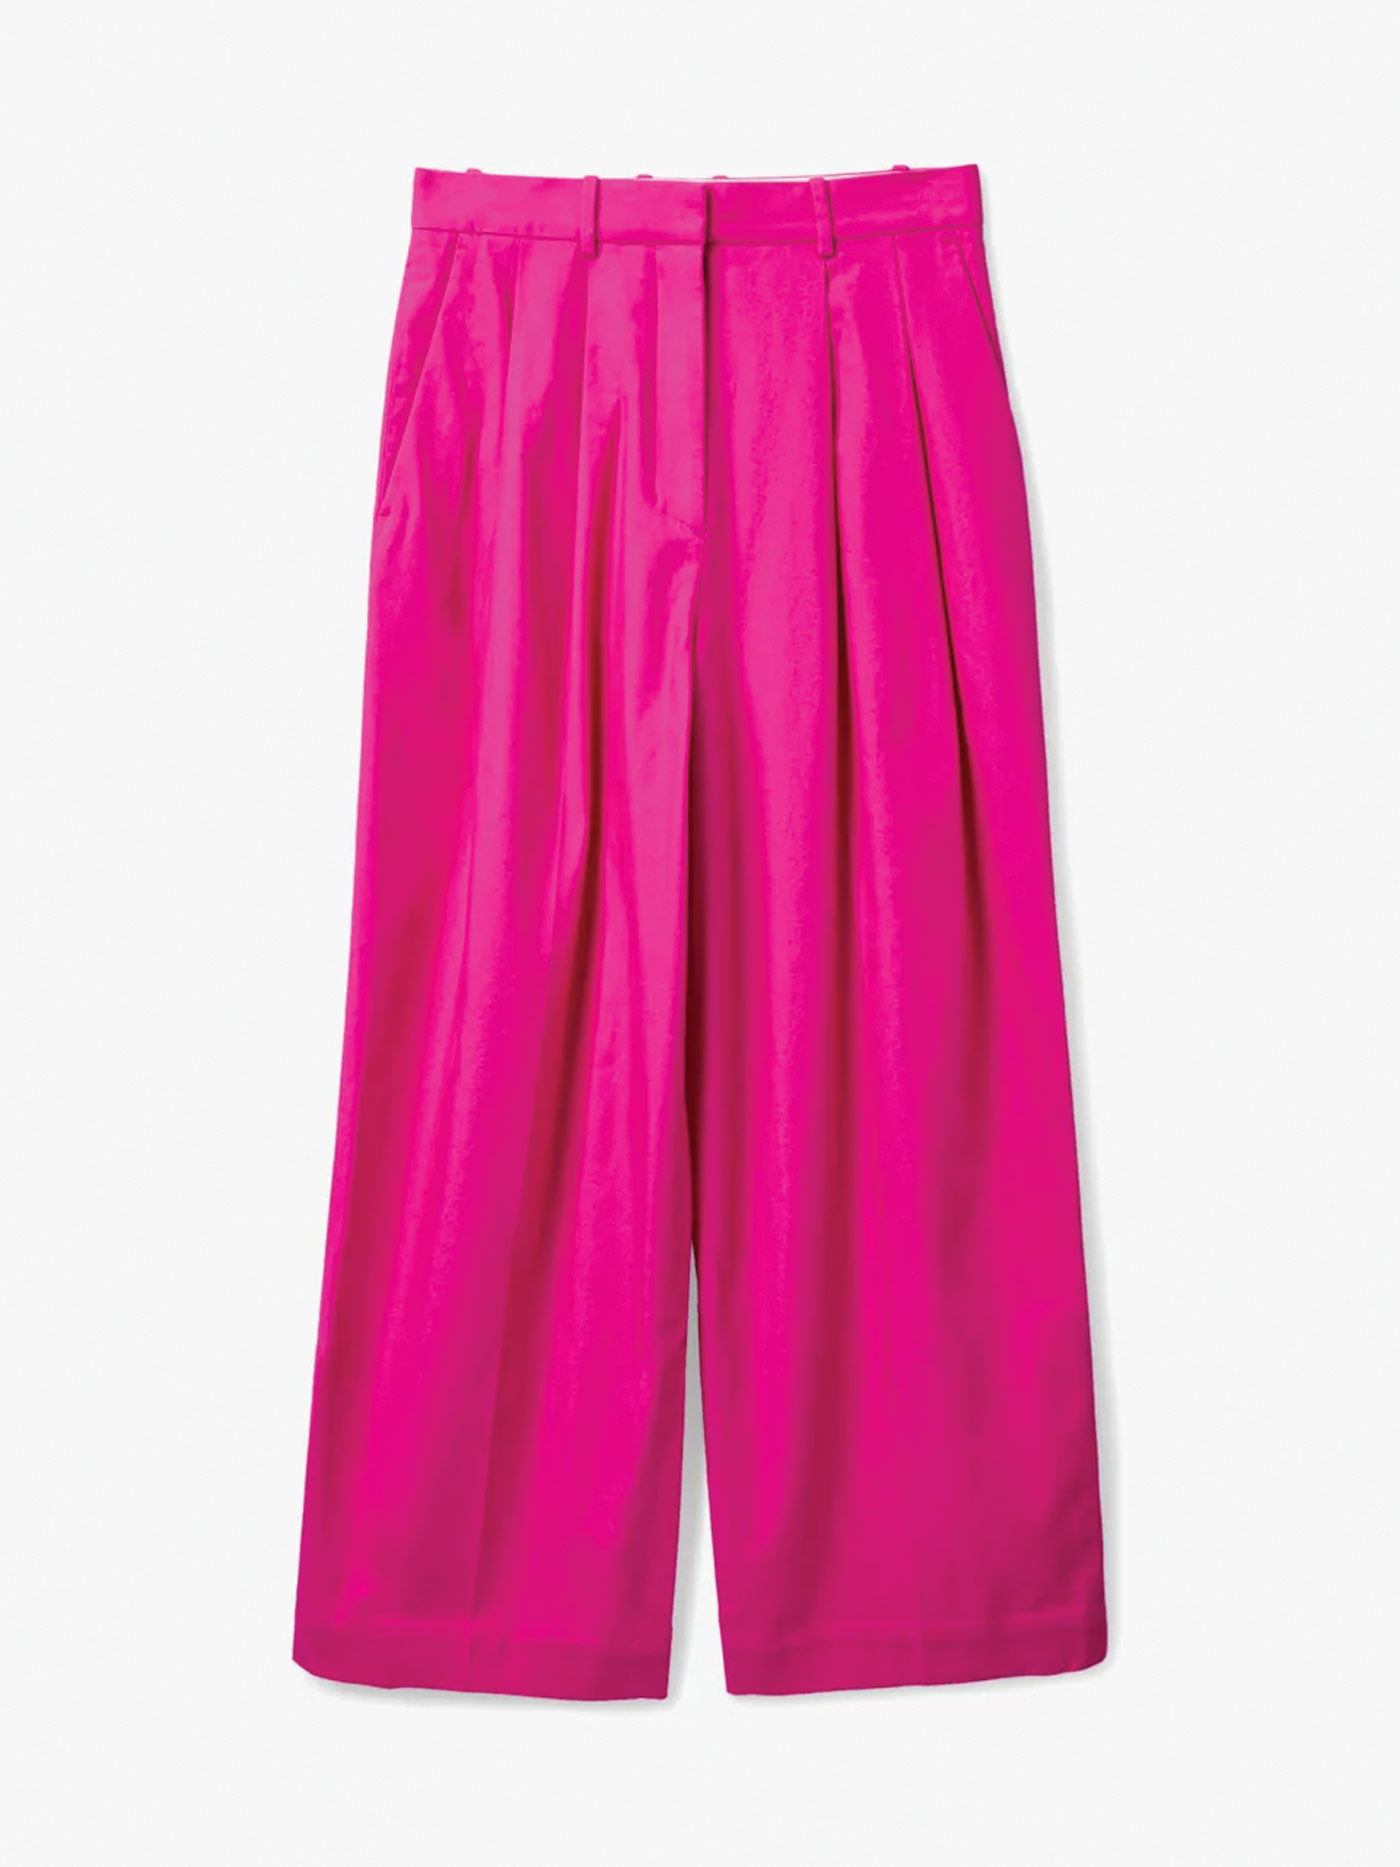 Wide Leg Tailored Trousers In Fuchsia Pink By Cos $135 Cos.com